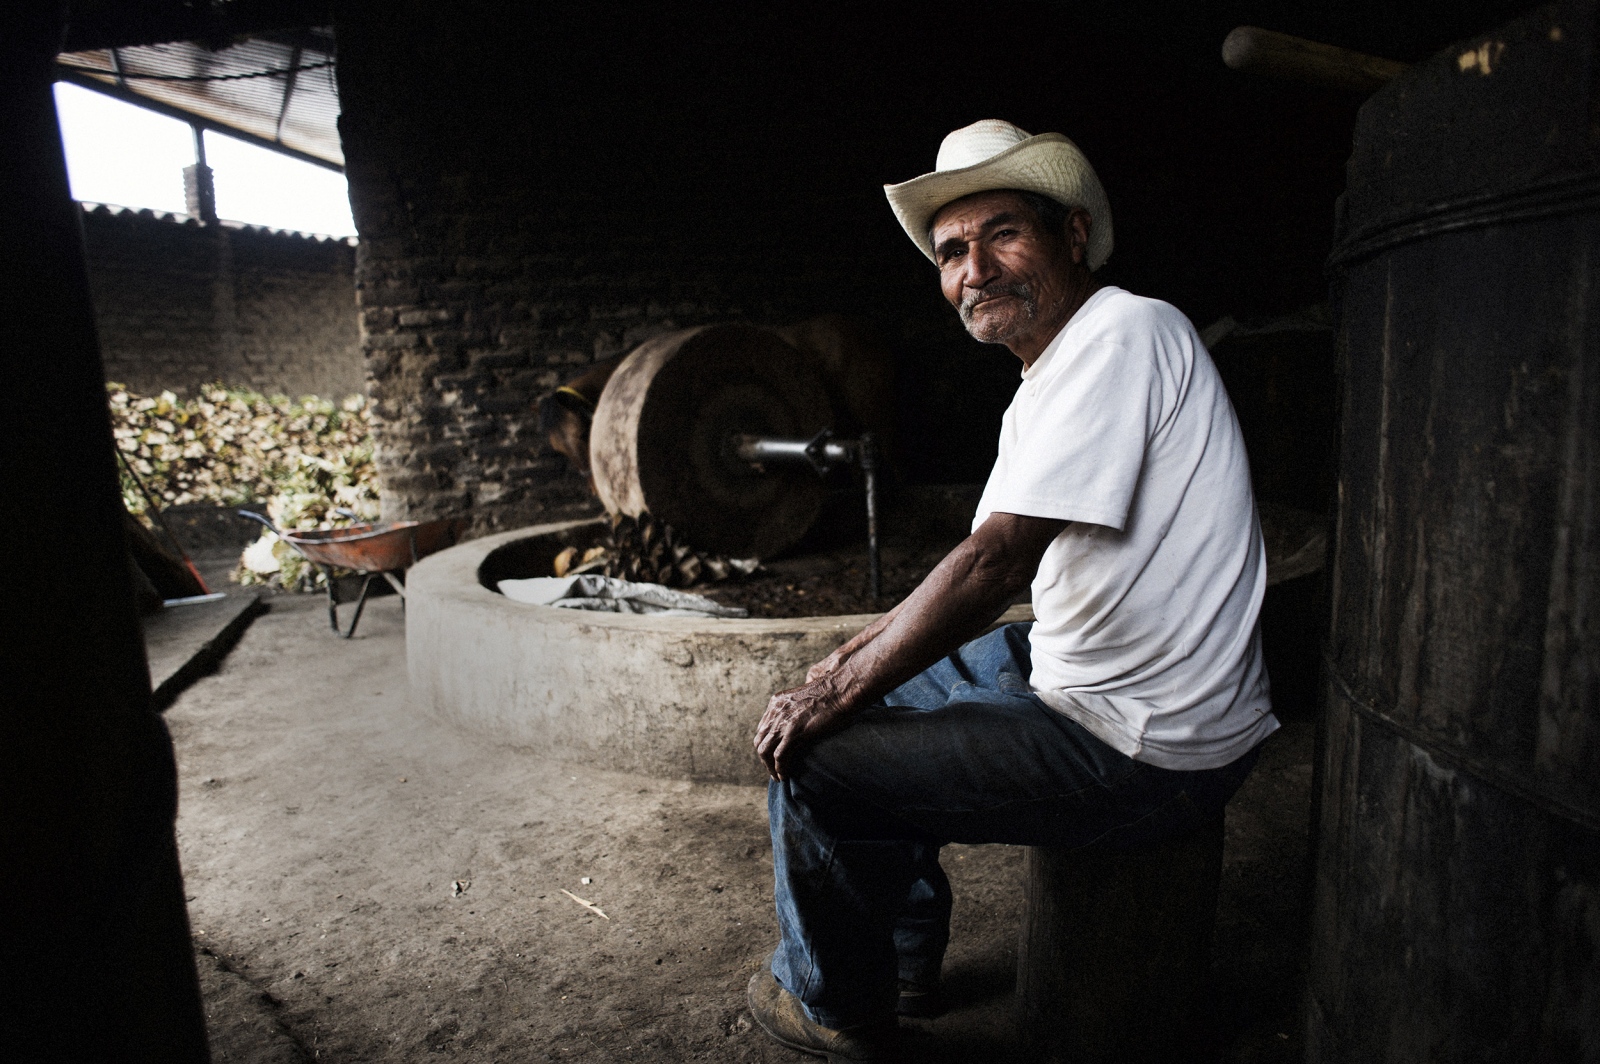 Agave, Corazón de México - A mezcalero sits in front of the large stone wheel used...